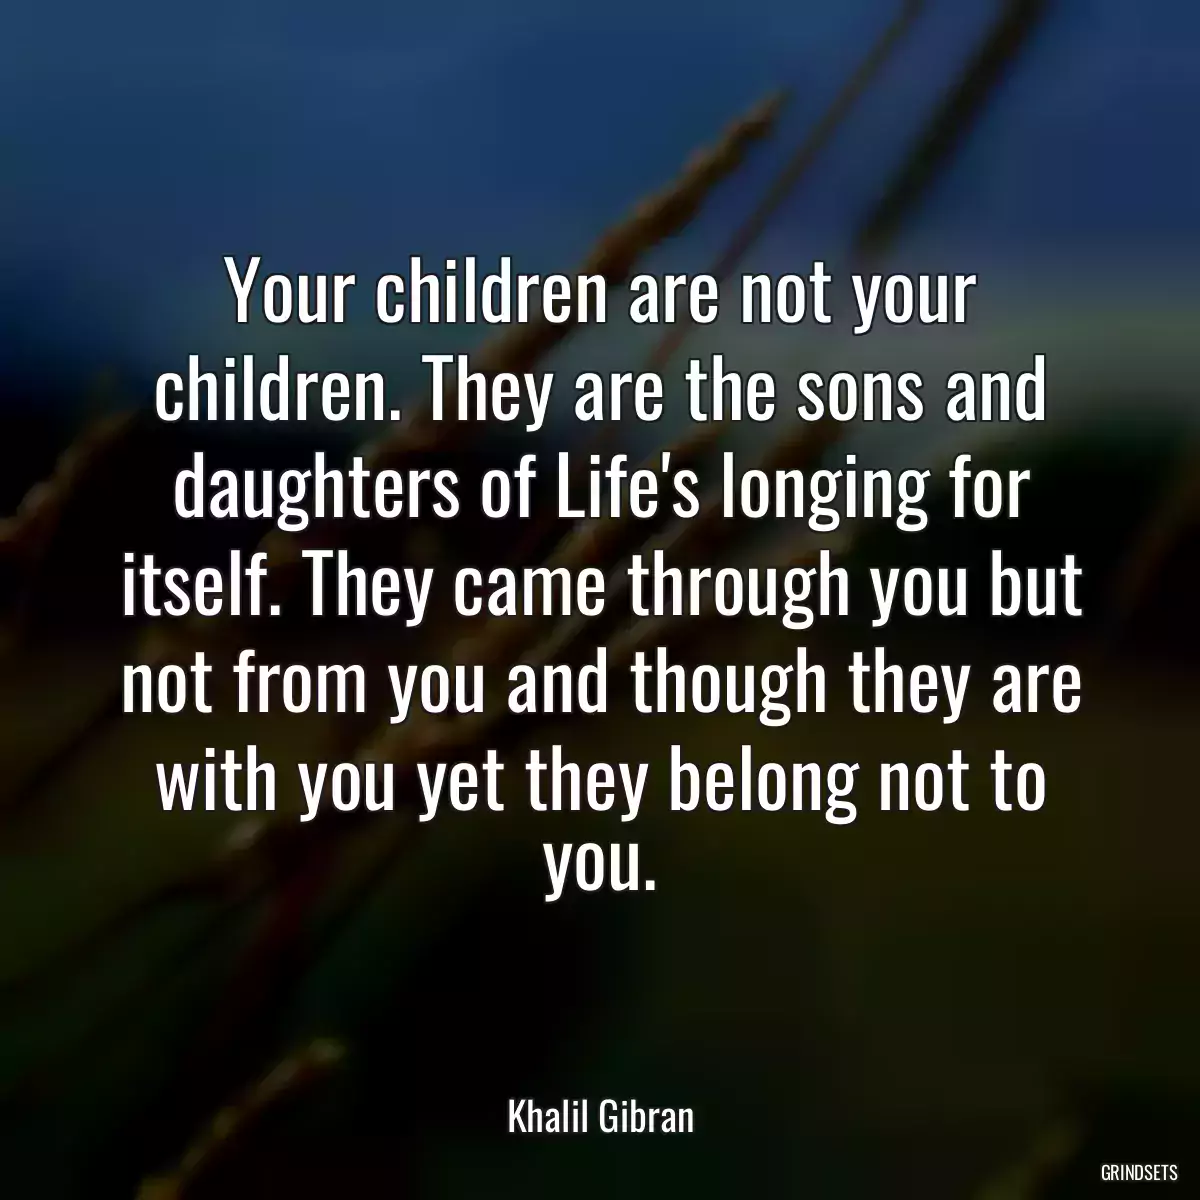 Your children are not your children. They are the sons and daughters of Life\'s longing for itself. They came through you but not from you and though they are with you yet they belong not to you.